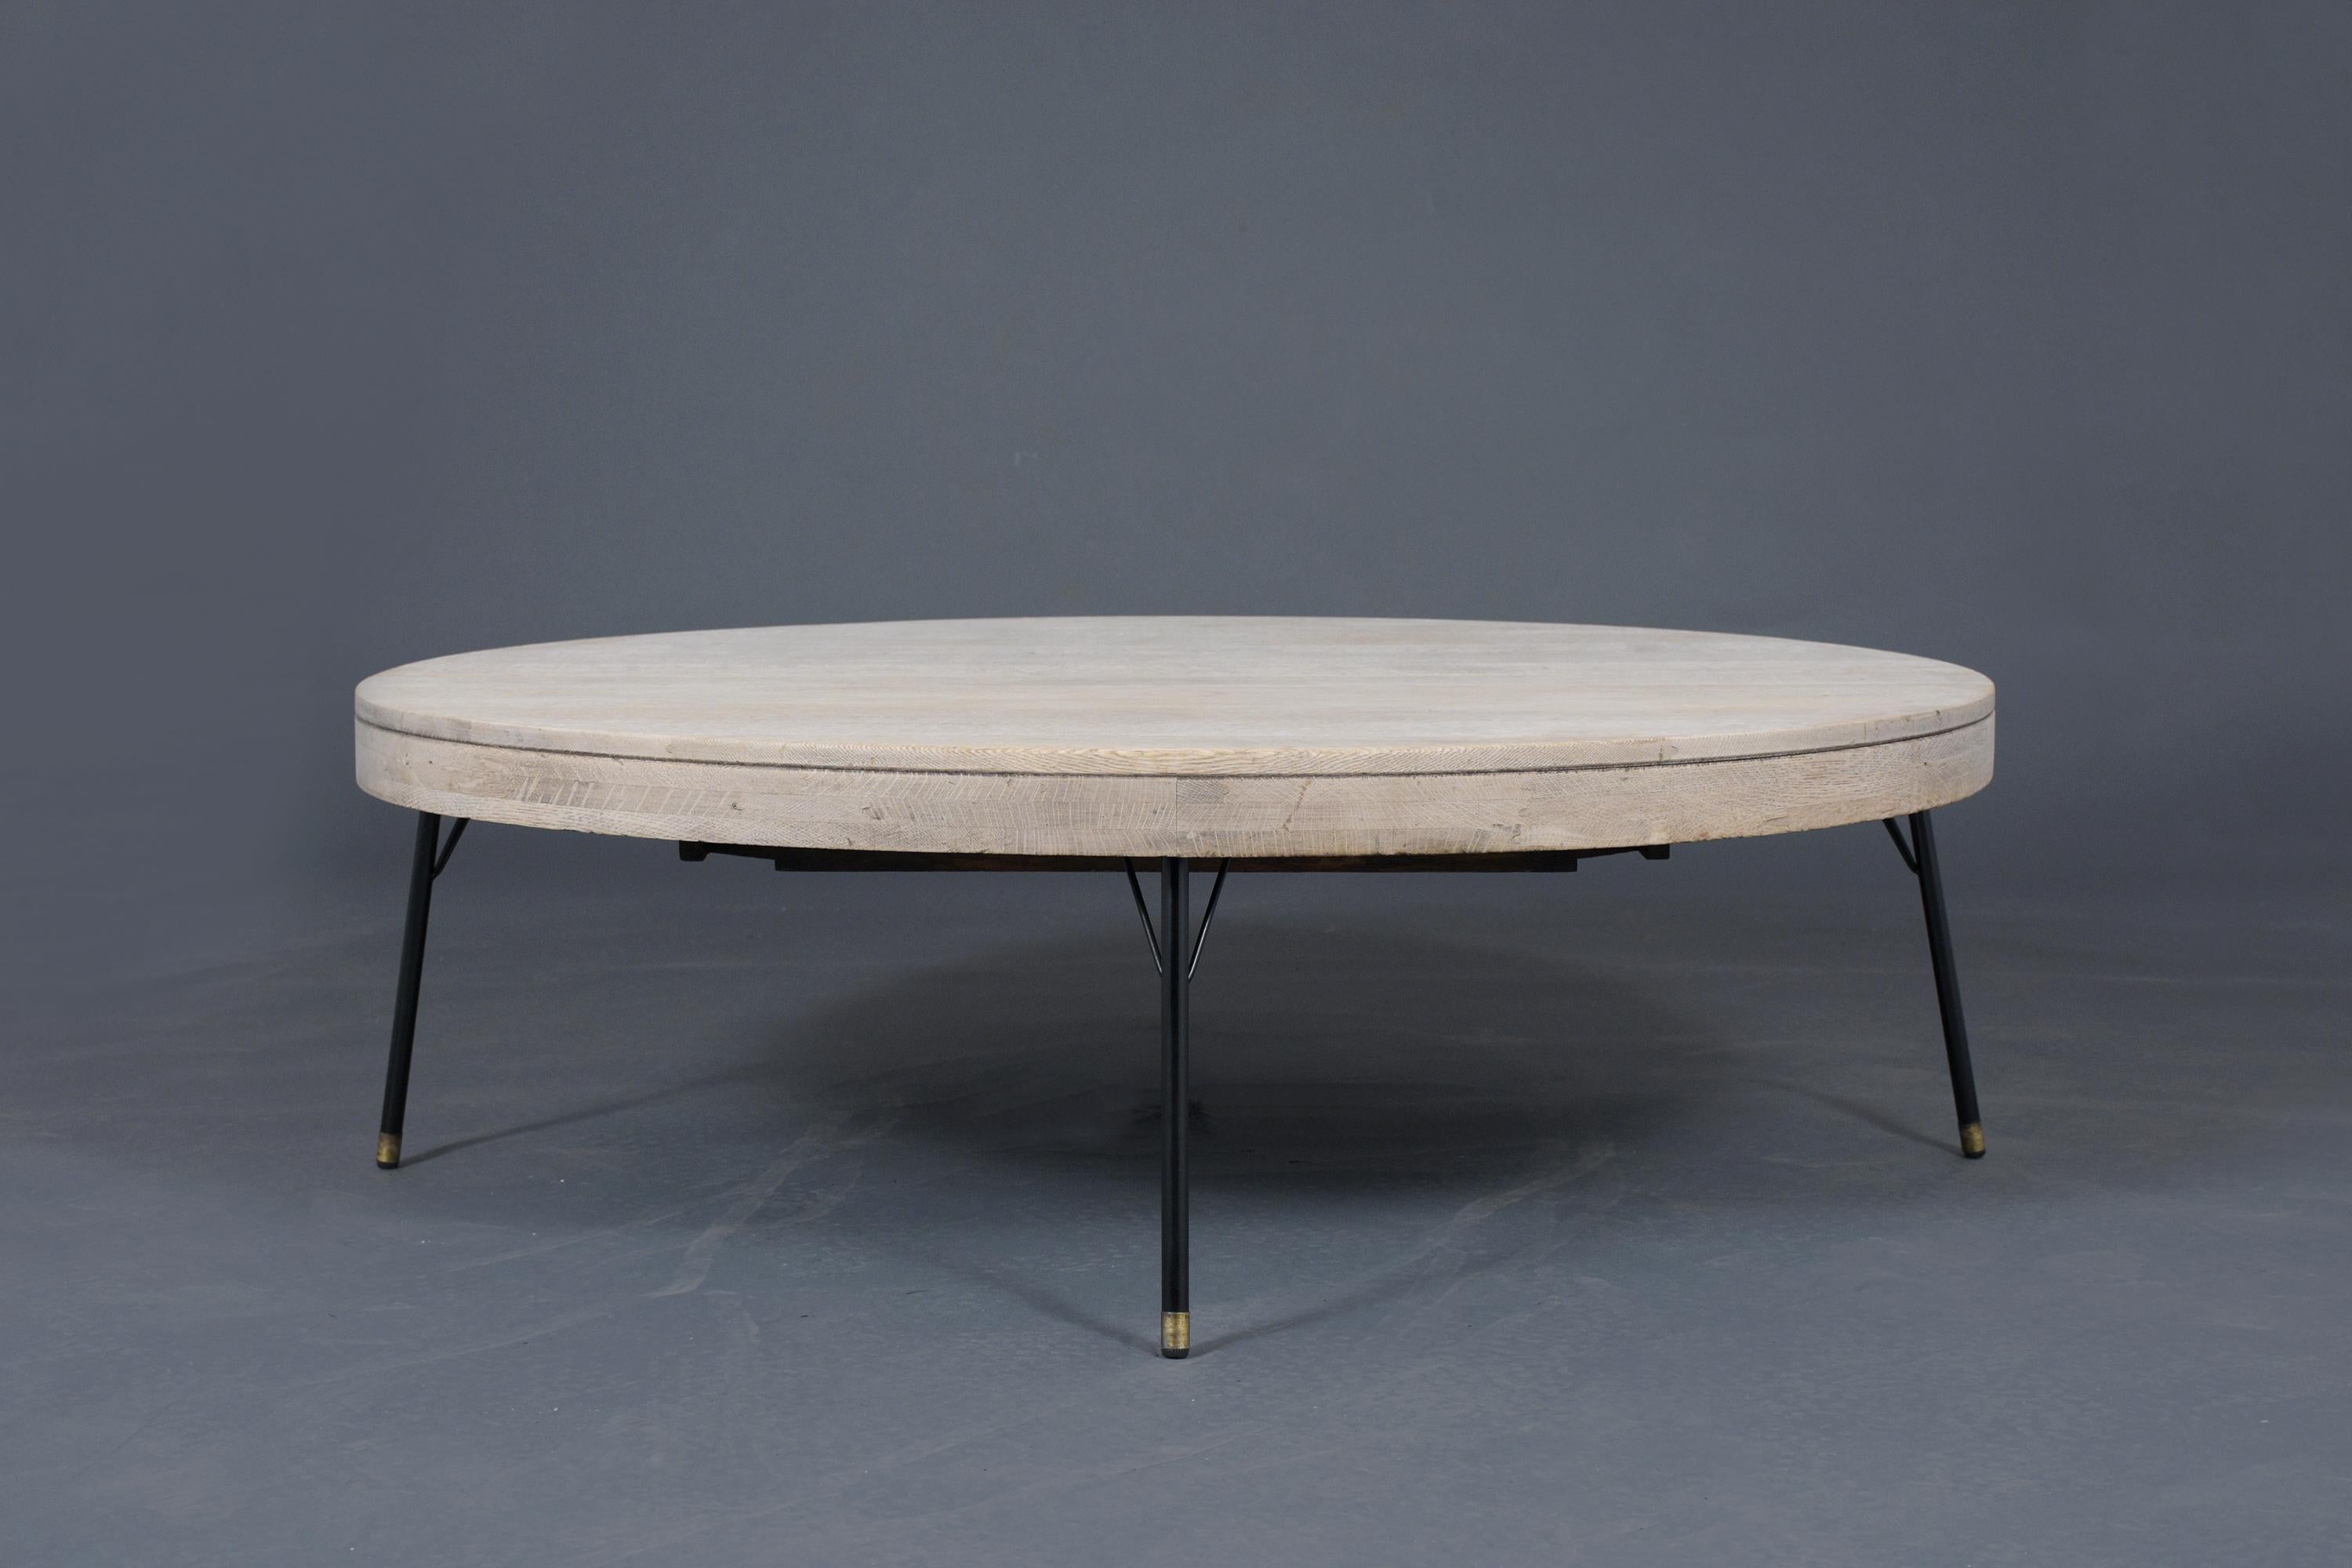 A Mid-Century Modern low coffee table crafted out of oak wood and has been professionally restored. It features a new bleached wood finish and sitting on four metal legs painted in black color with brass accents. The Modern Bleached Low Table is